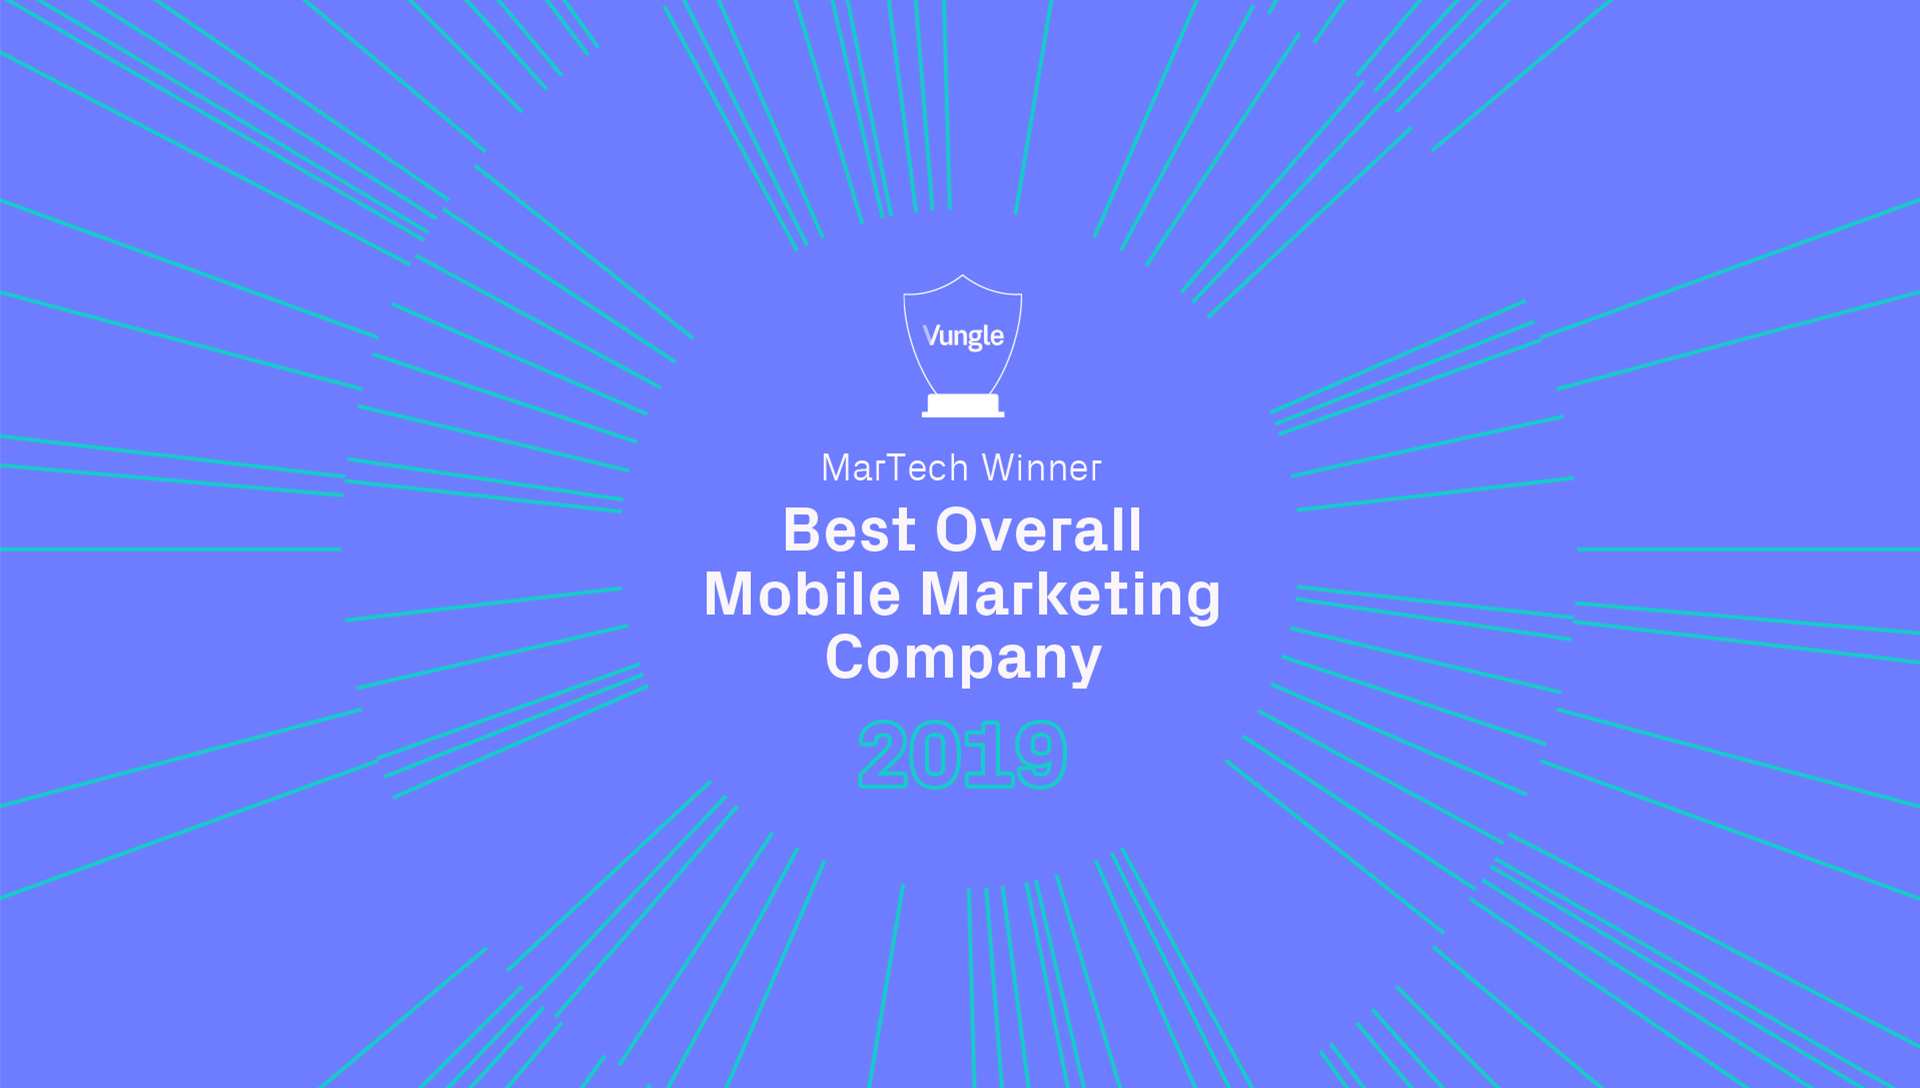 Vungle Named Best Mobile Marketing Company by Leading Martech Org